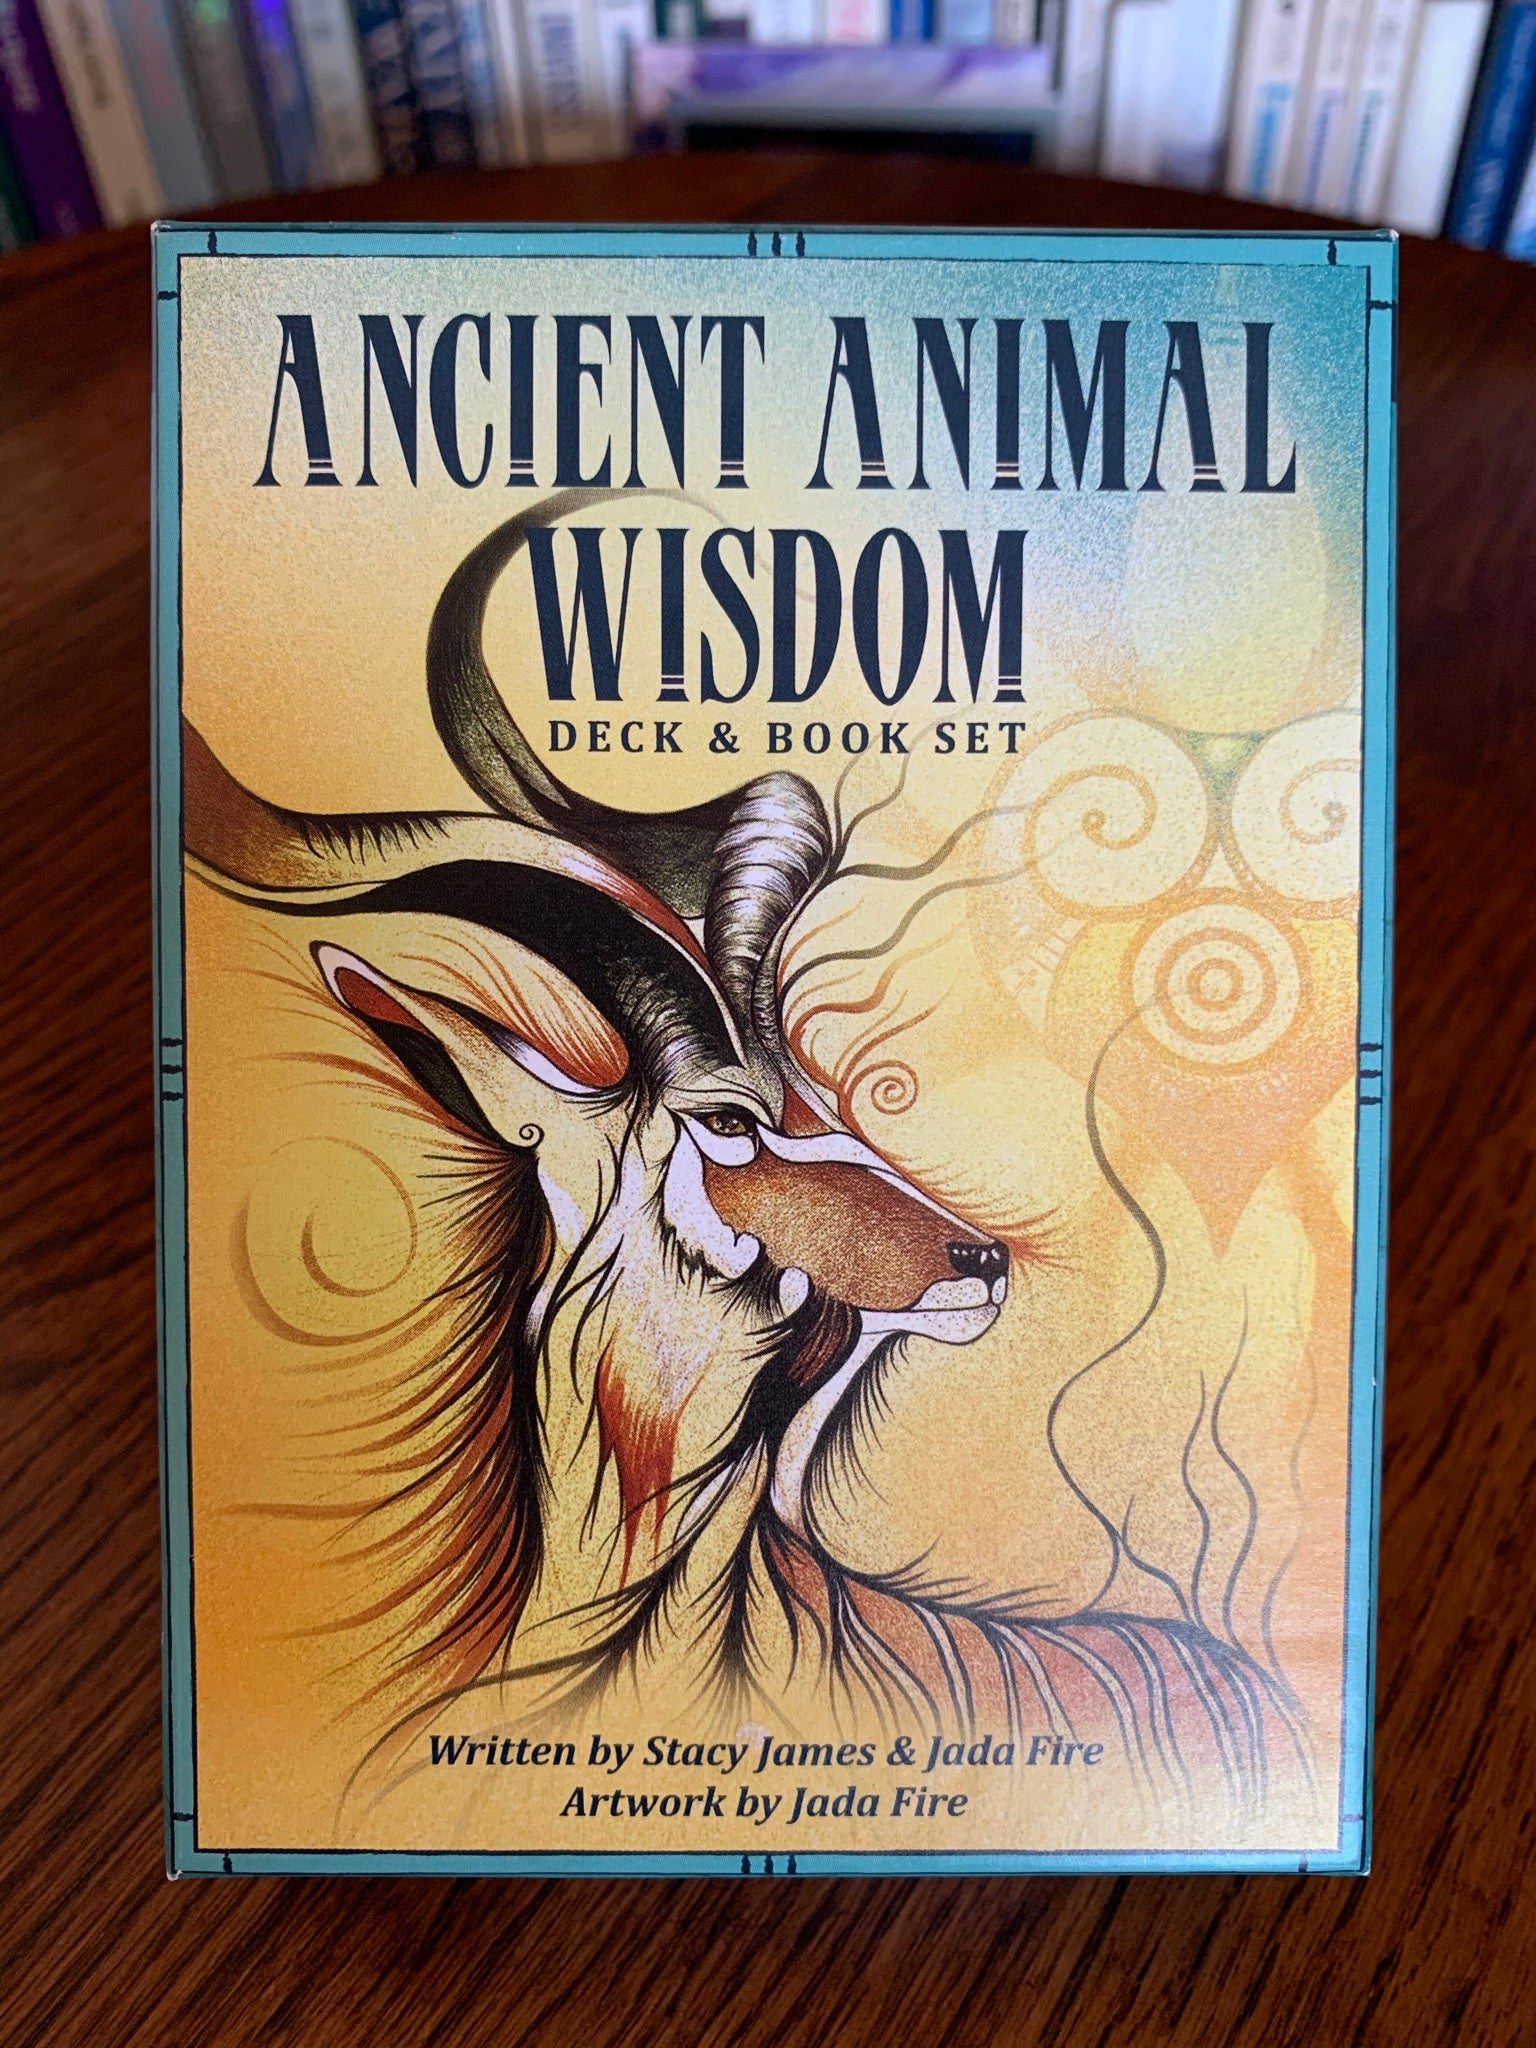 Photo of box front. The Ancient Animal Wisdom Deck and Book Set is beautifully illustrated - very colorful and visually appealing. What I find very special about this deck is that a) all of the animals are ones found in Africa (mostly in Zambia) and b) underneath the English name for the animal, you will find the African name, which I love! I also like the fact that, in the guidebook, they include information about numerology. The set includes 38 cards, a guidebook & box for storage. Cost is $22.95.